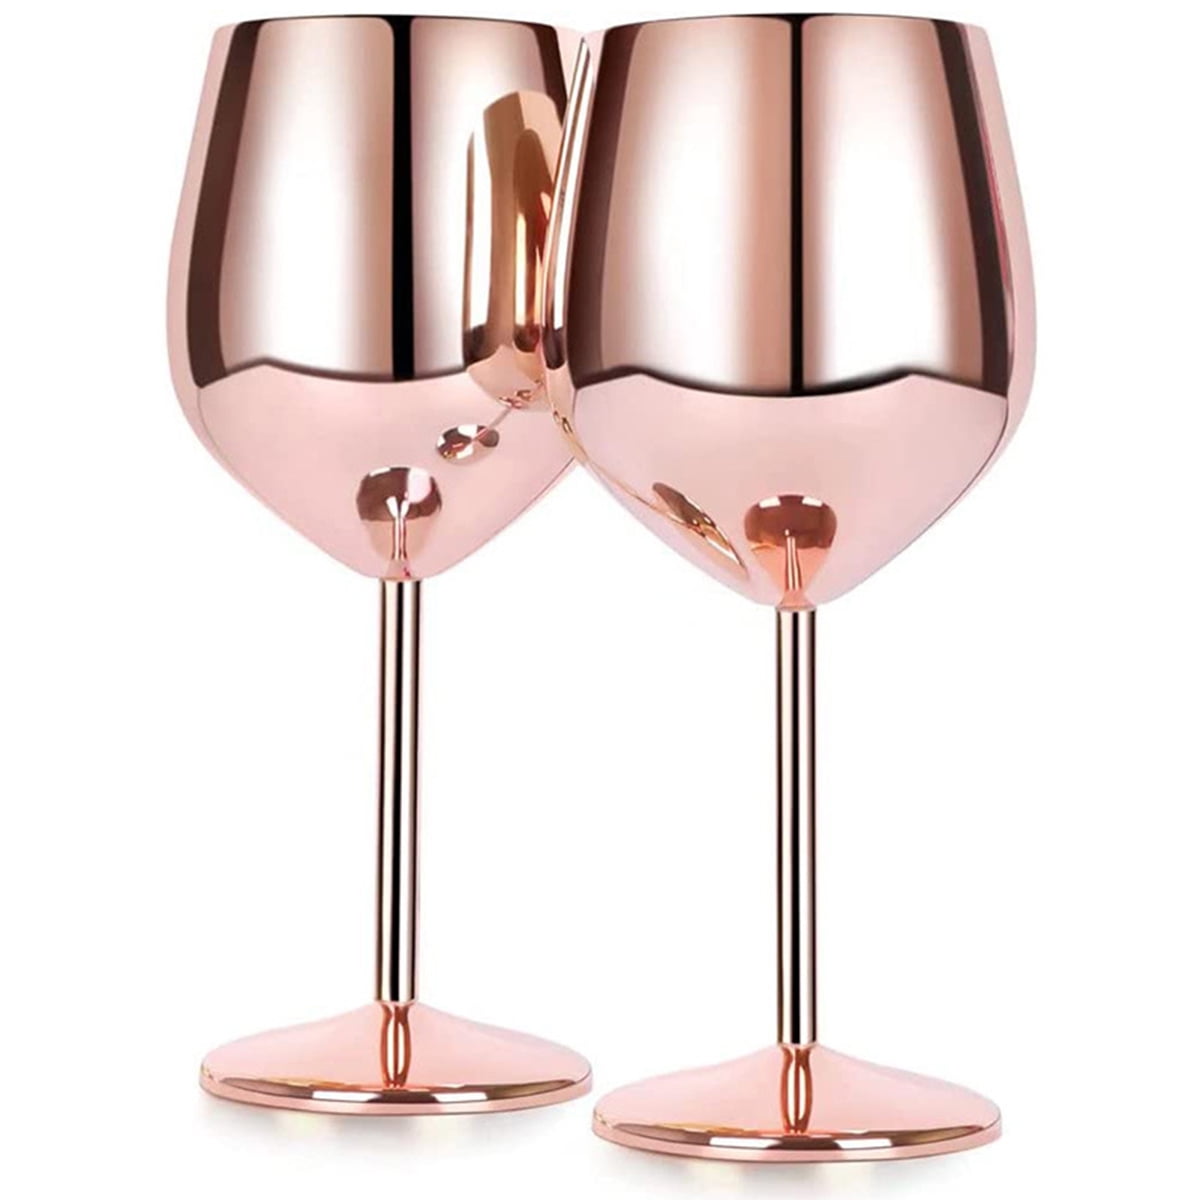 EMESLY 12oz Stainless Steel Double-Walled Insulated Wine Goblets (Set of 2,  Rose Gold) Unbreakable S…See more EMESLY 12oz Stainless Steel